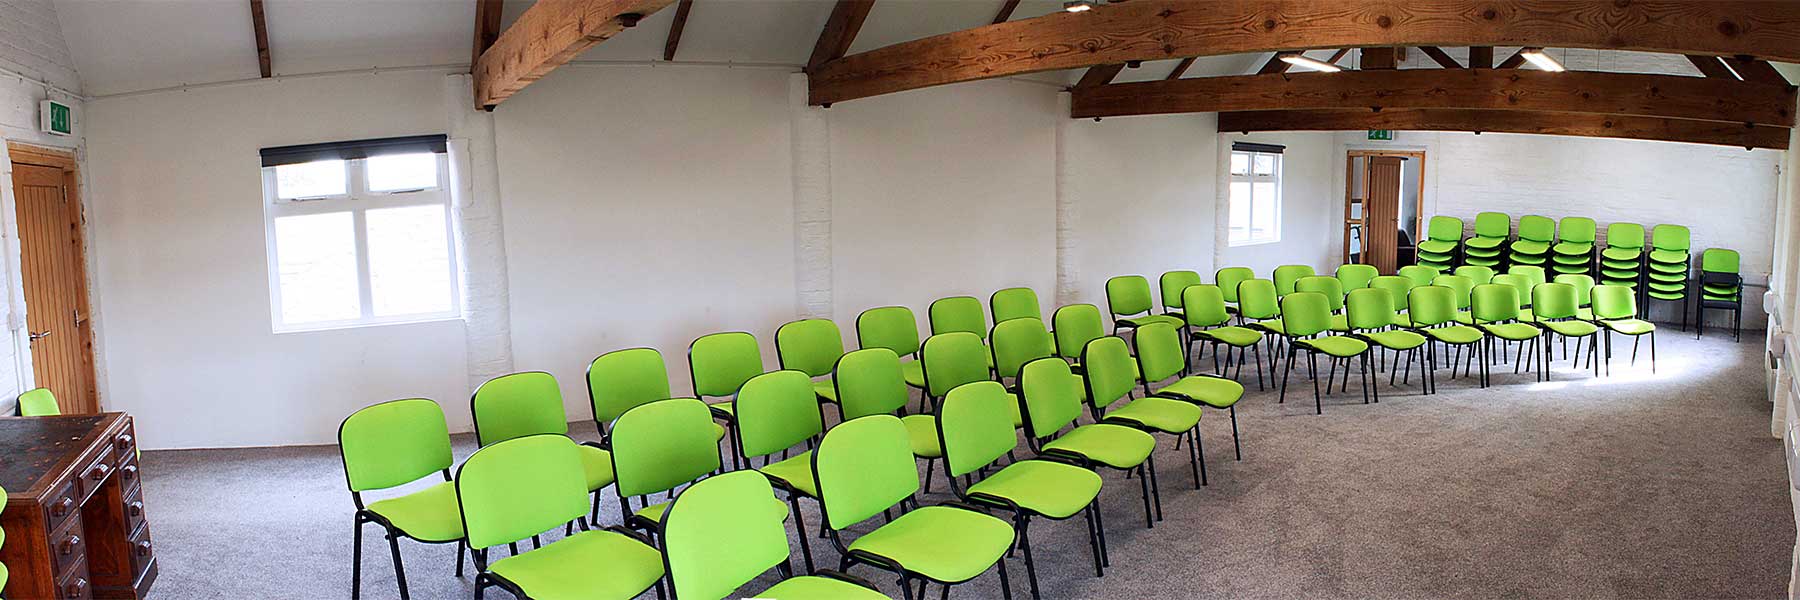 Conference Room for Hire